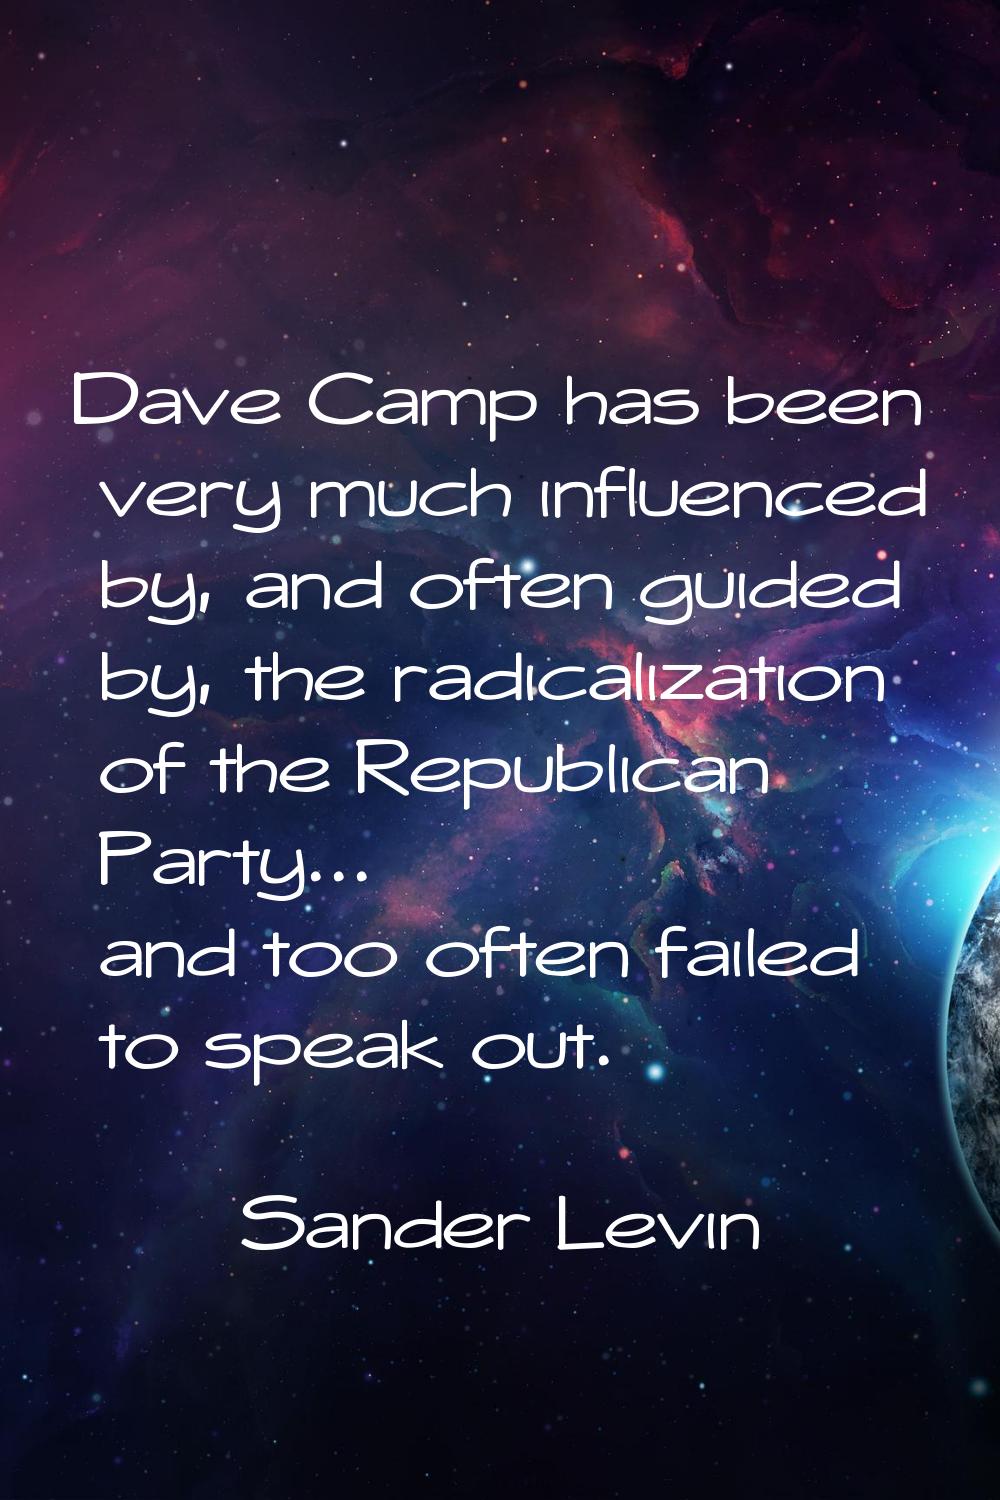 Dave Camp has been very much influenced by, and often guided by, the radicalization of the Republic